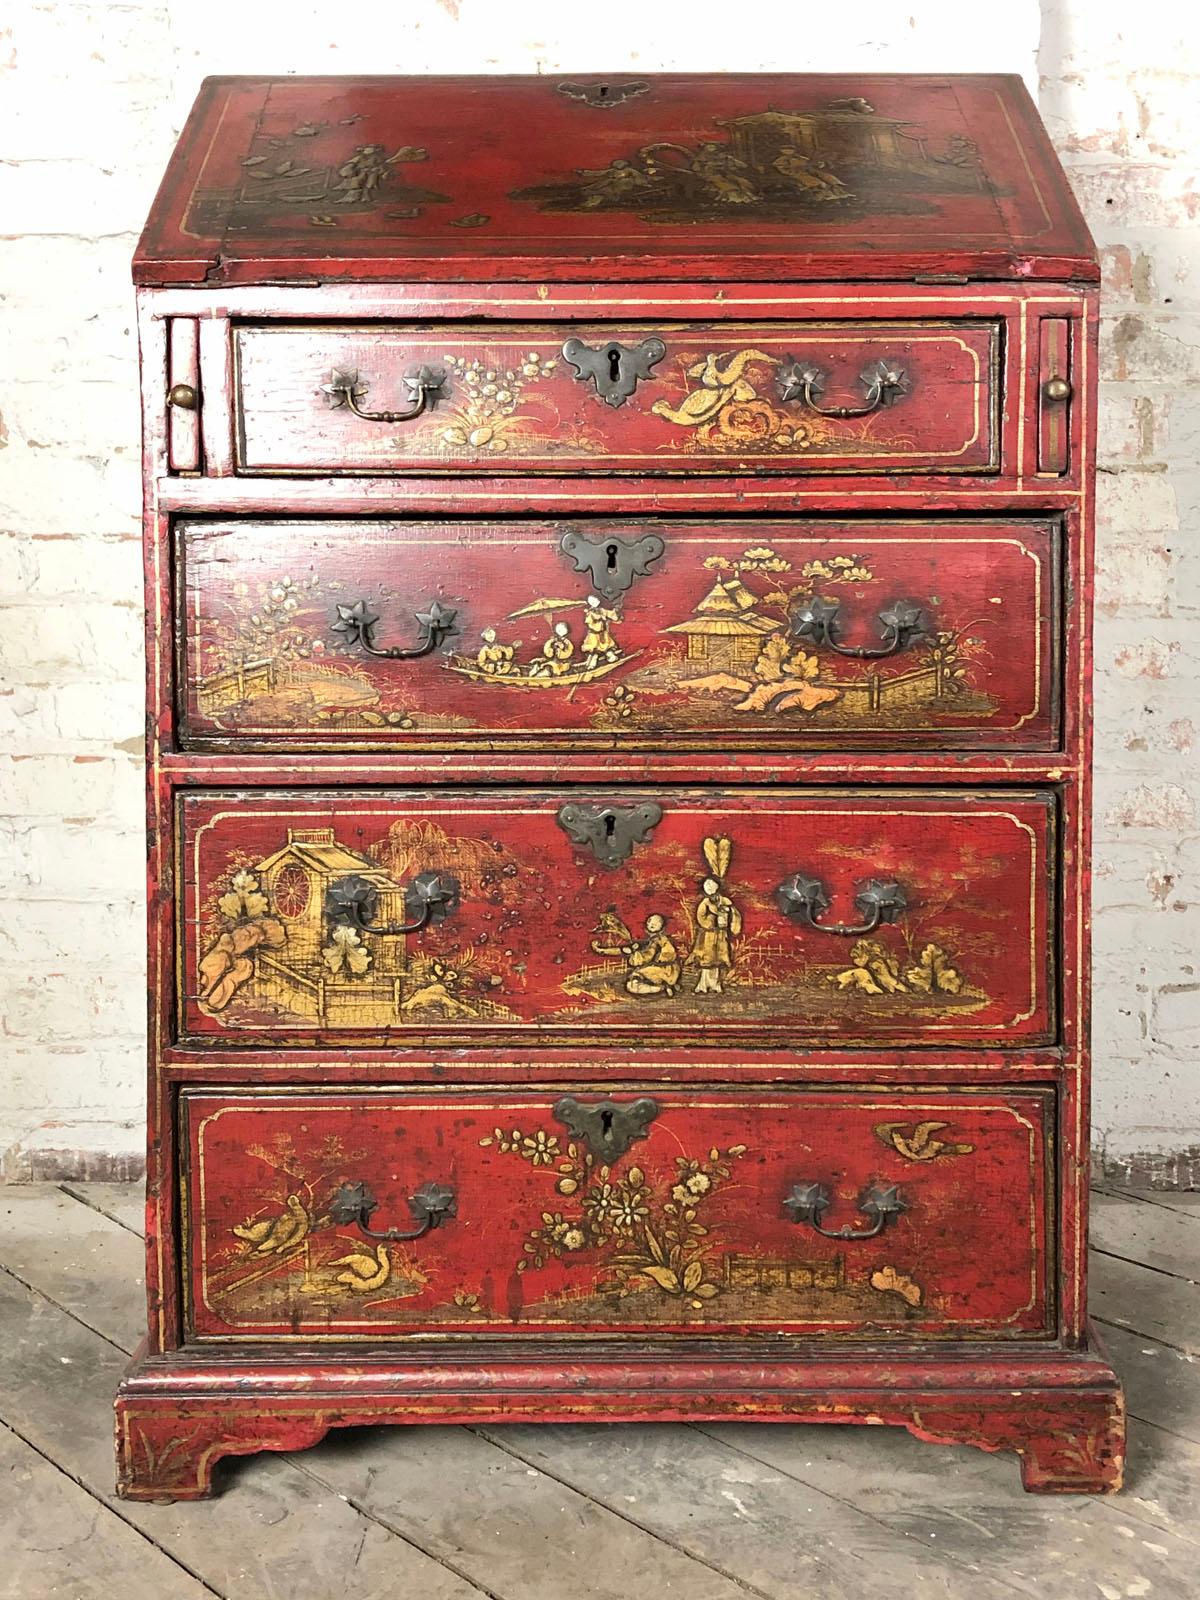 A small early 18th century red lacquer chinoiserie decorated commode with a desk compartment, the hinged slant front - flip top, supported by pull-out bars left and right, revealing four open compartments above three serpentine front drawers behind